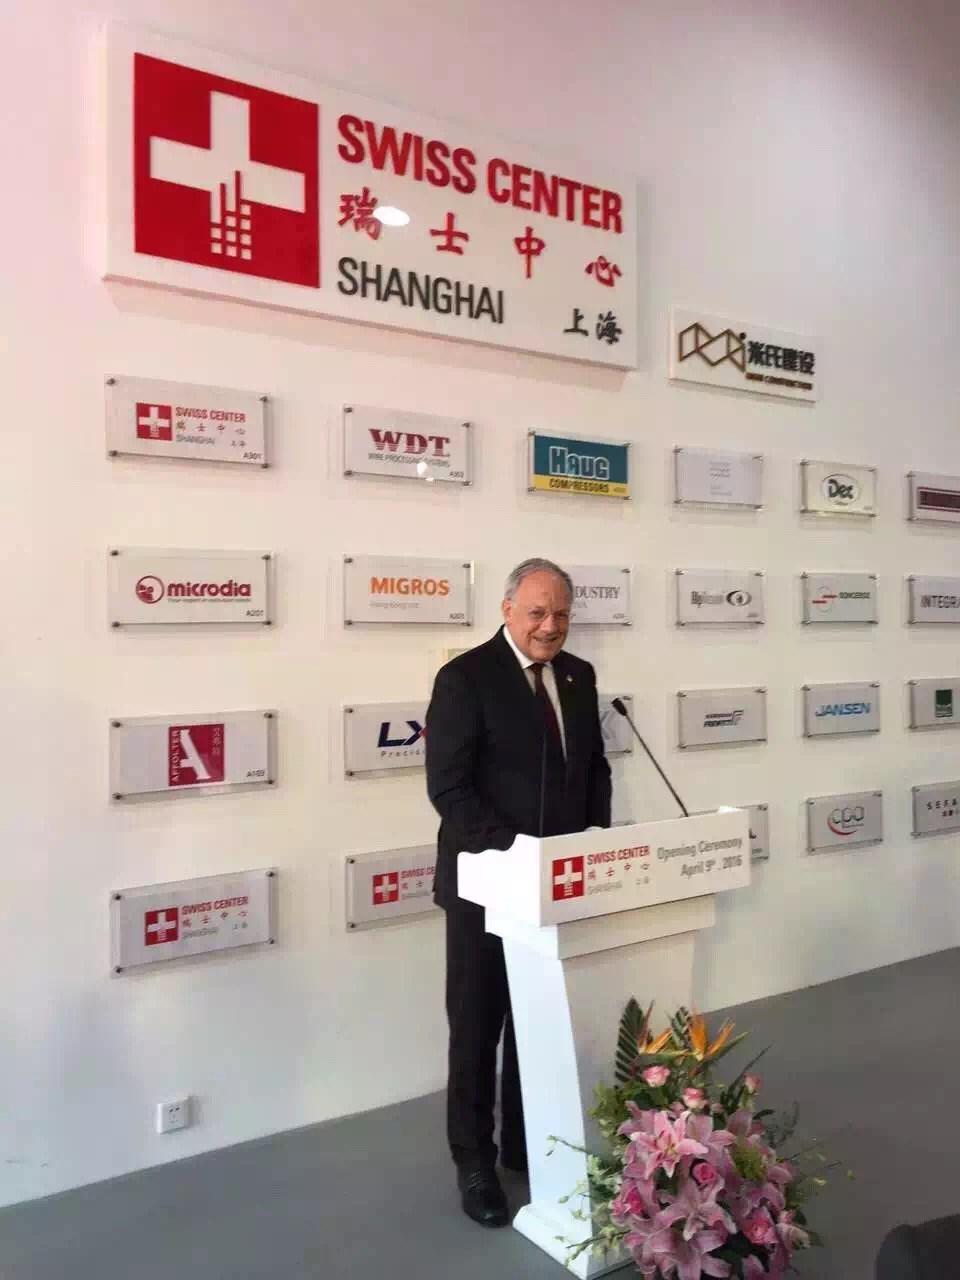 Newsletter No 54 Page 2 Swiss president Schneider-Ammann highlights competitiveness of Swiss companies in China The footprints set by the Swiss companies present in China today represent the core